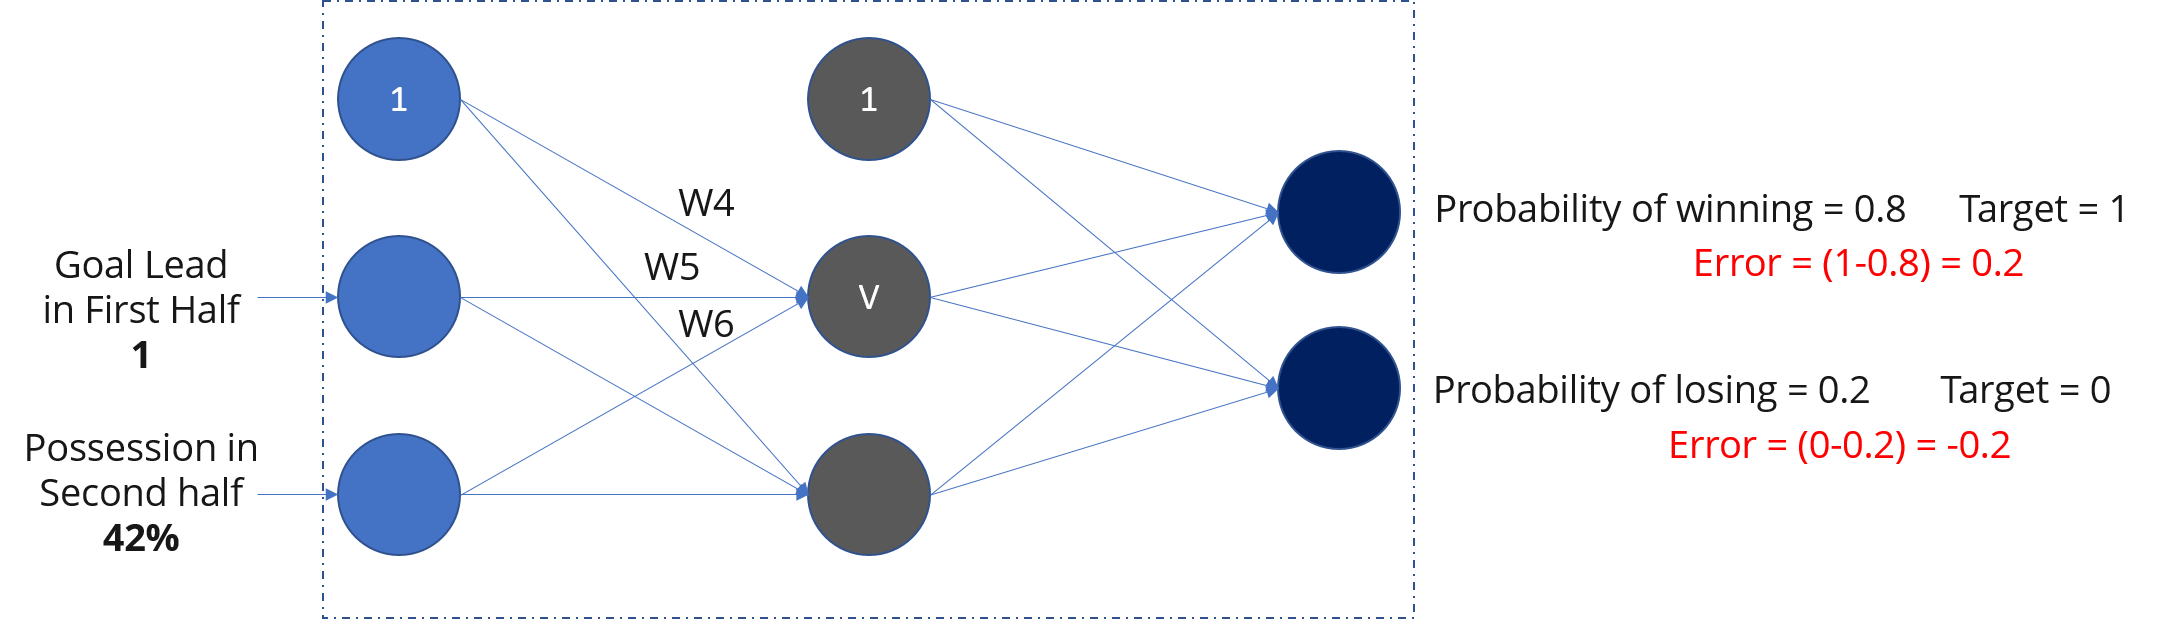 neural networks tutorial point